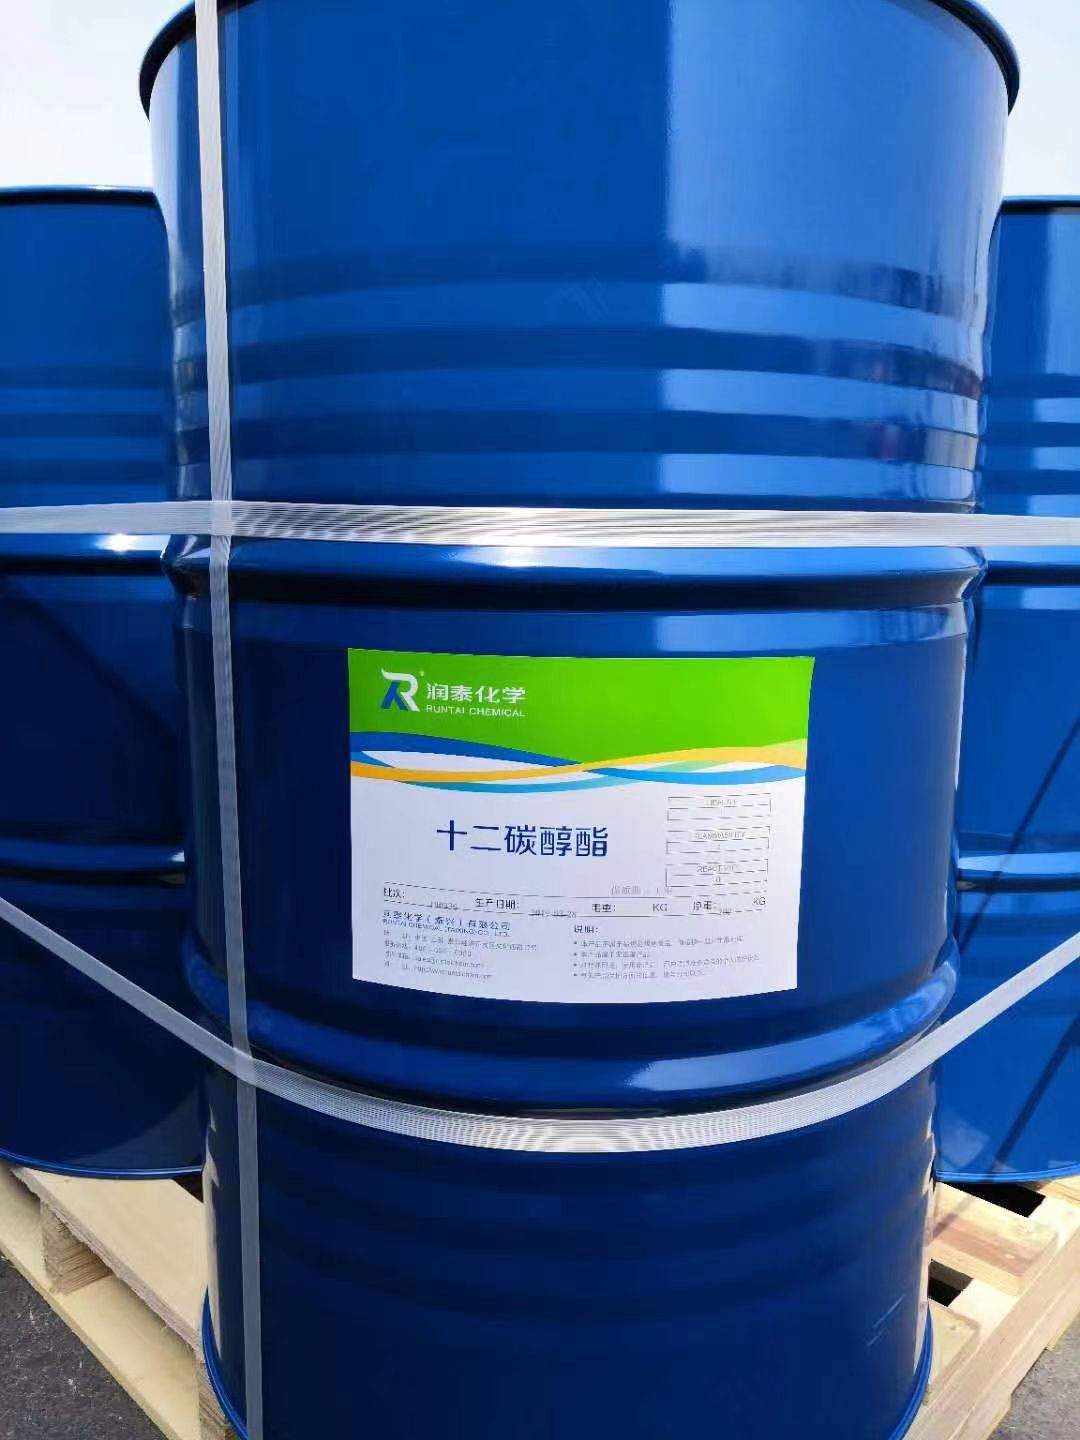 Texanol Coating Paint Texanol Ester Alcoho12 For Water-Based Coatings Featured Image